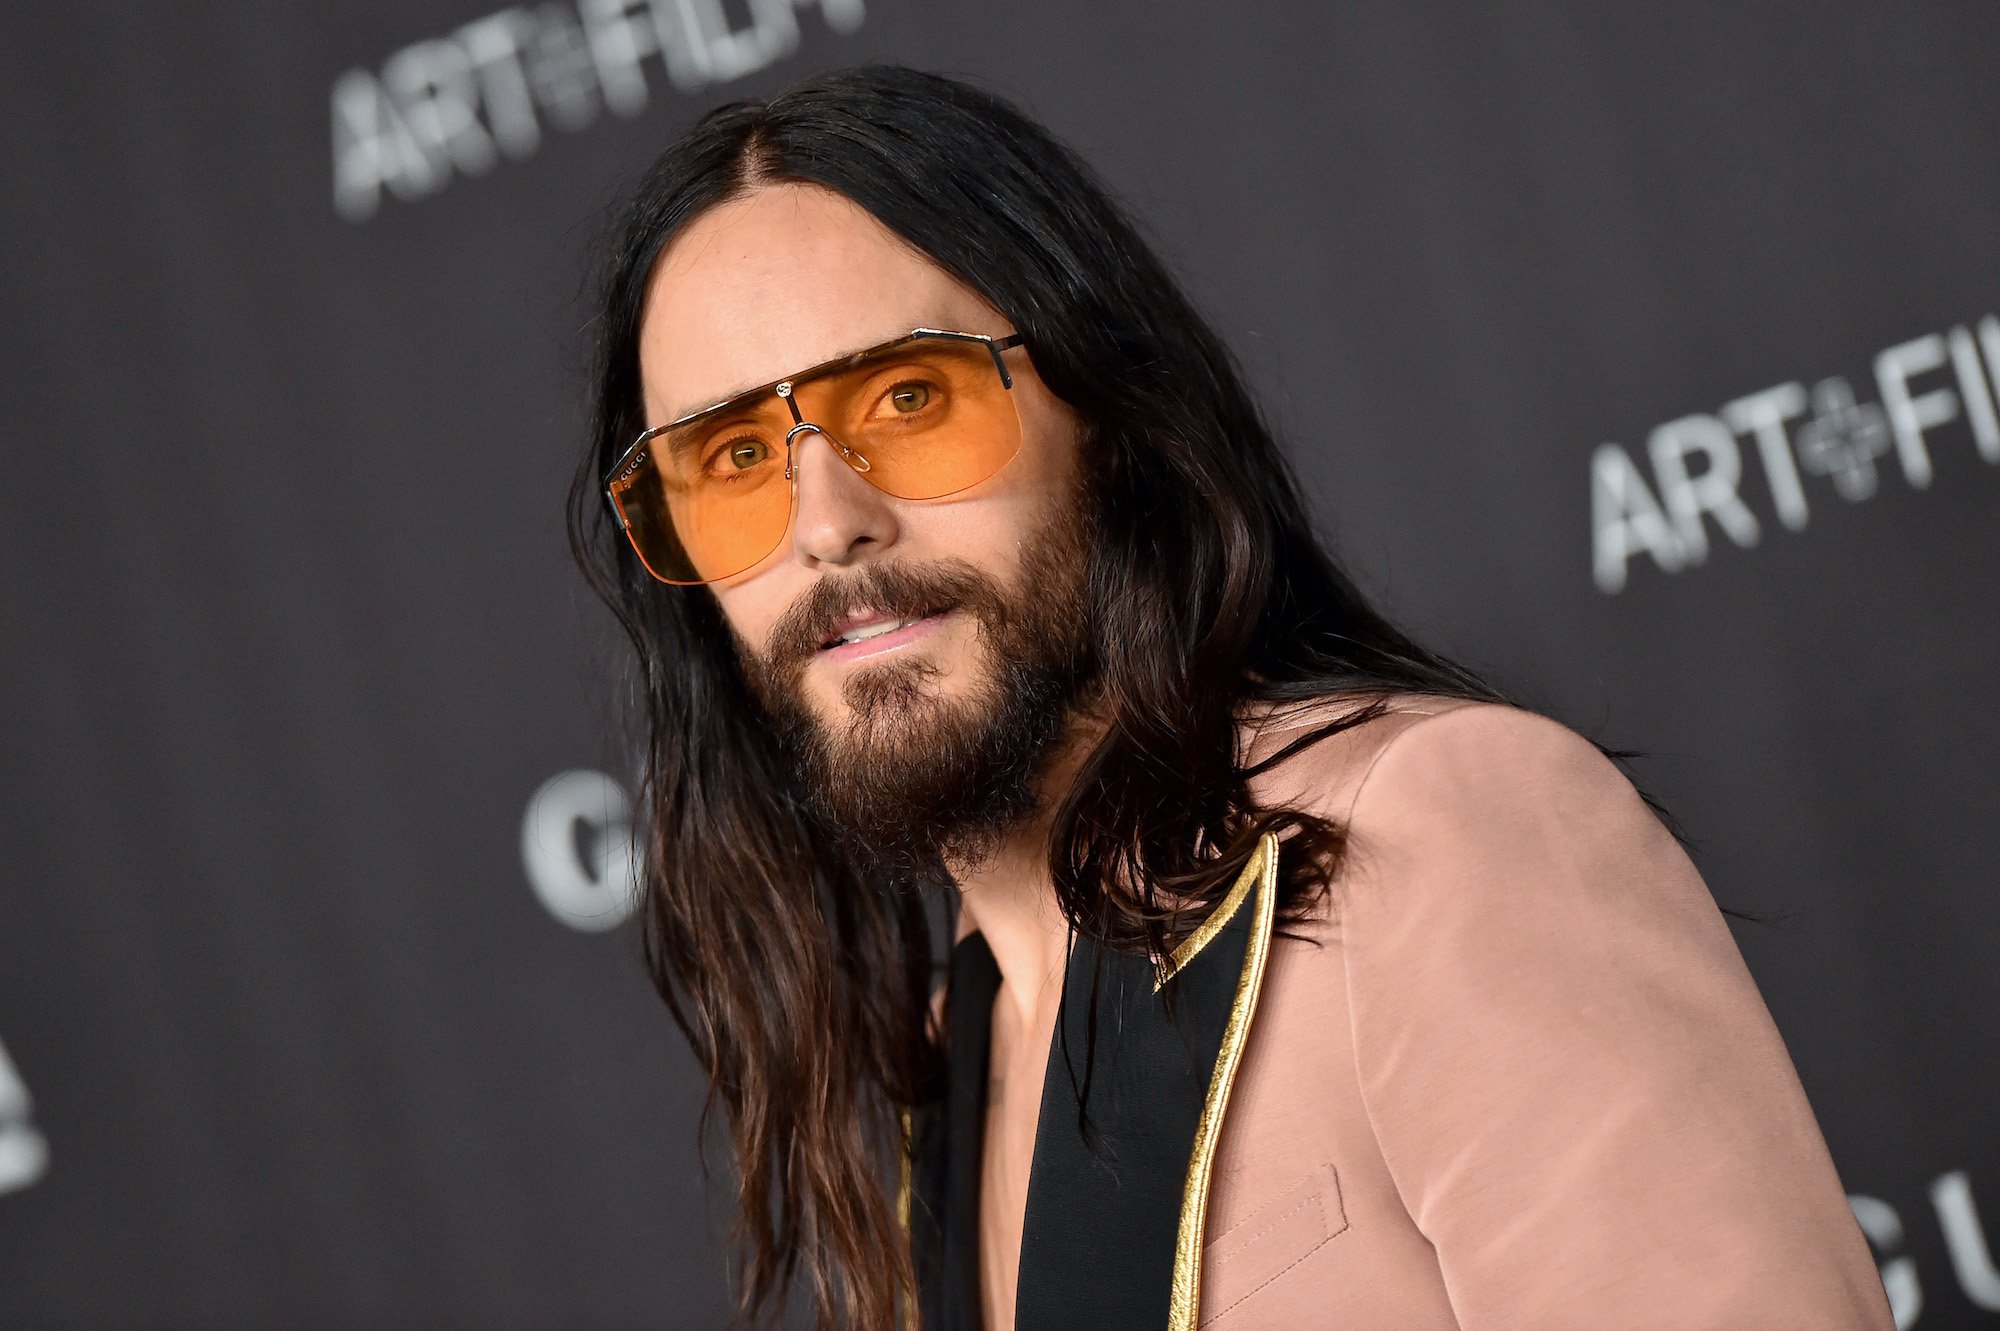 Jared Leto Received Wild Fan Gift of a Cut Off Ear—’I Poked a Hole In It and Wore It As a Necklace’